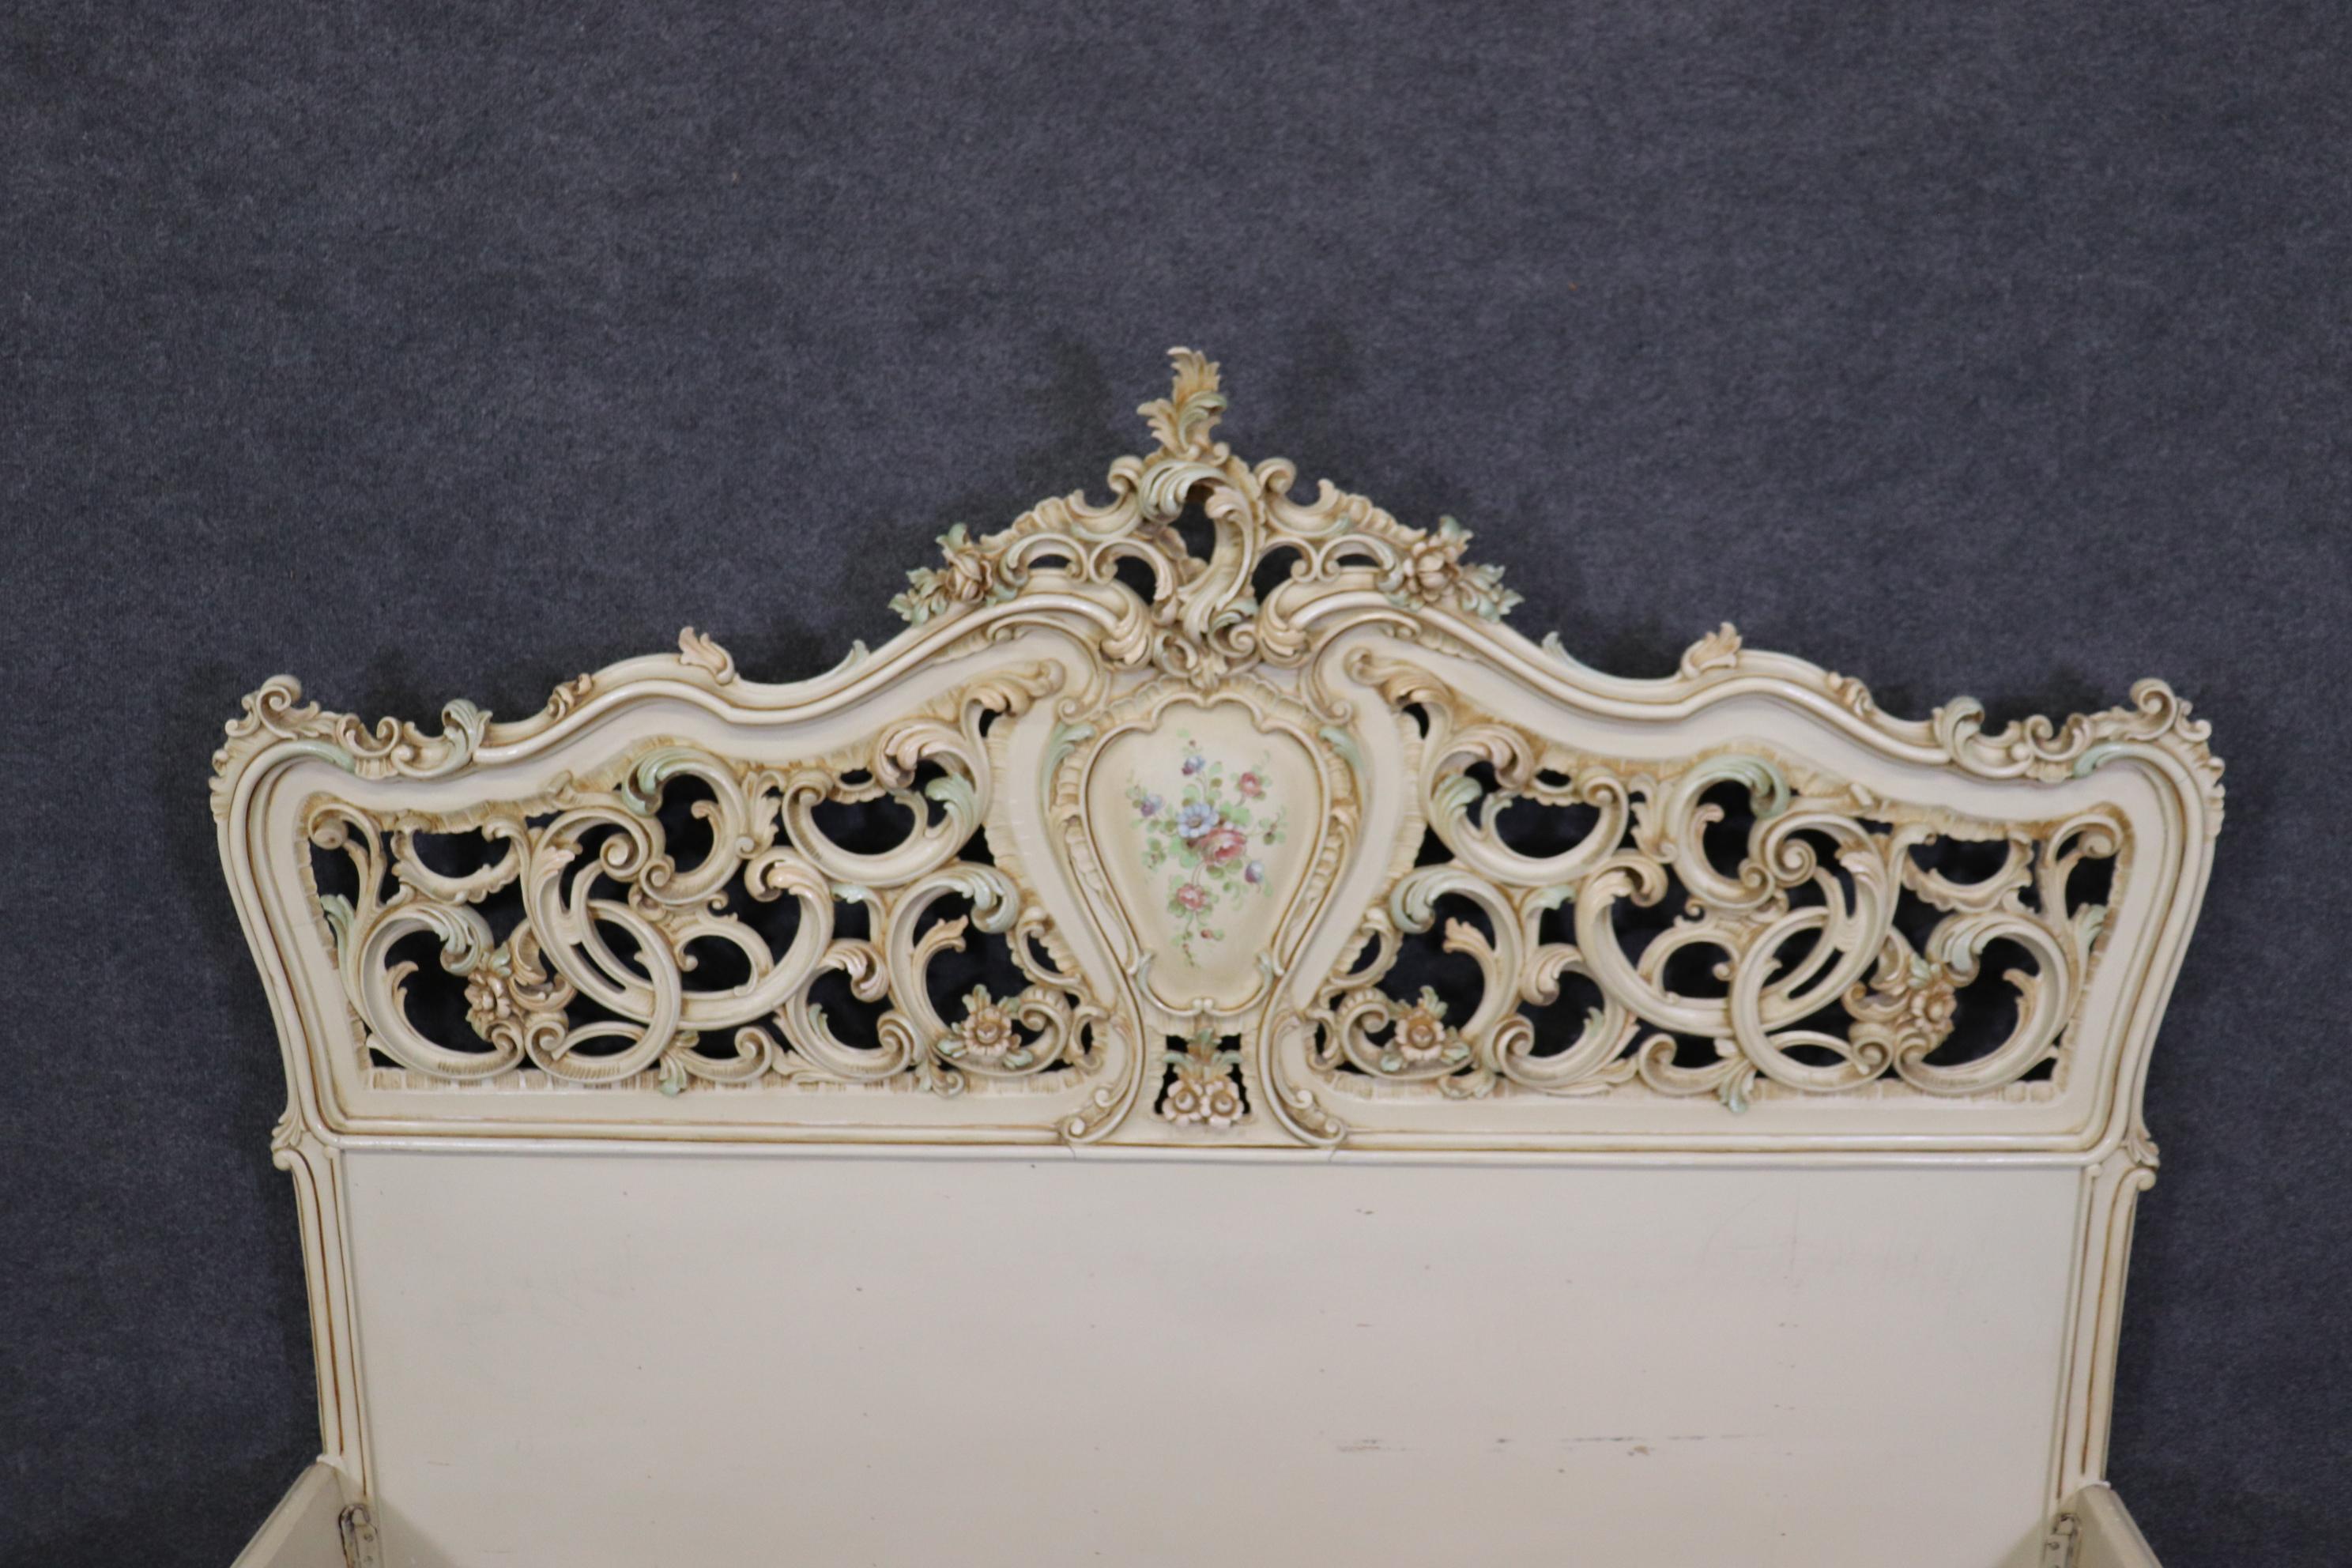 Rococo Revival Over-Sized Queen Size Carved Italian Vernis Martin Painted Rococo Bed For Sale